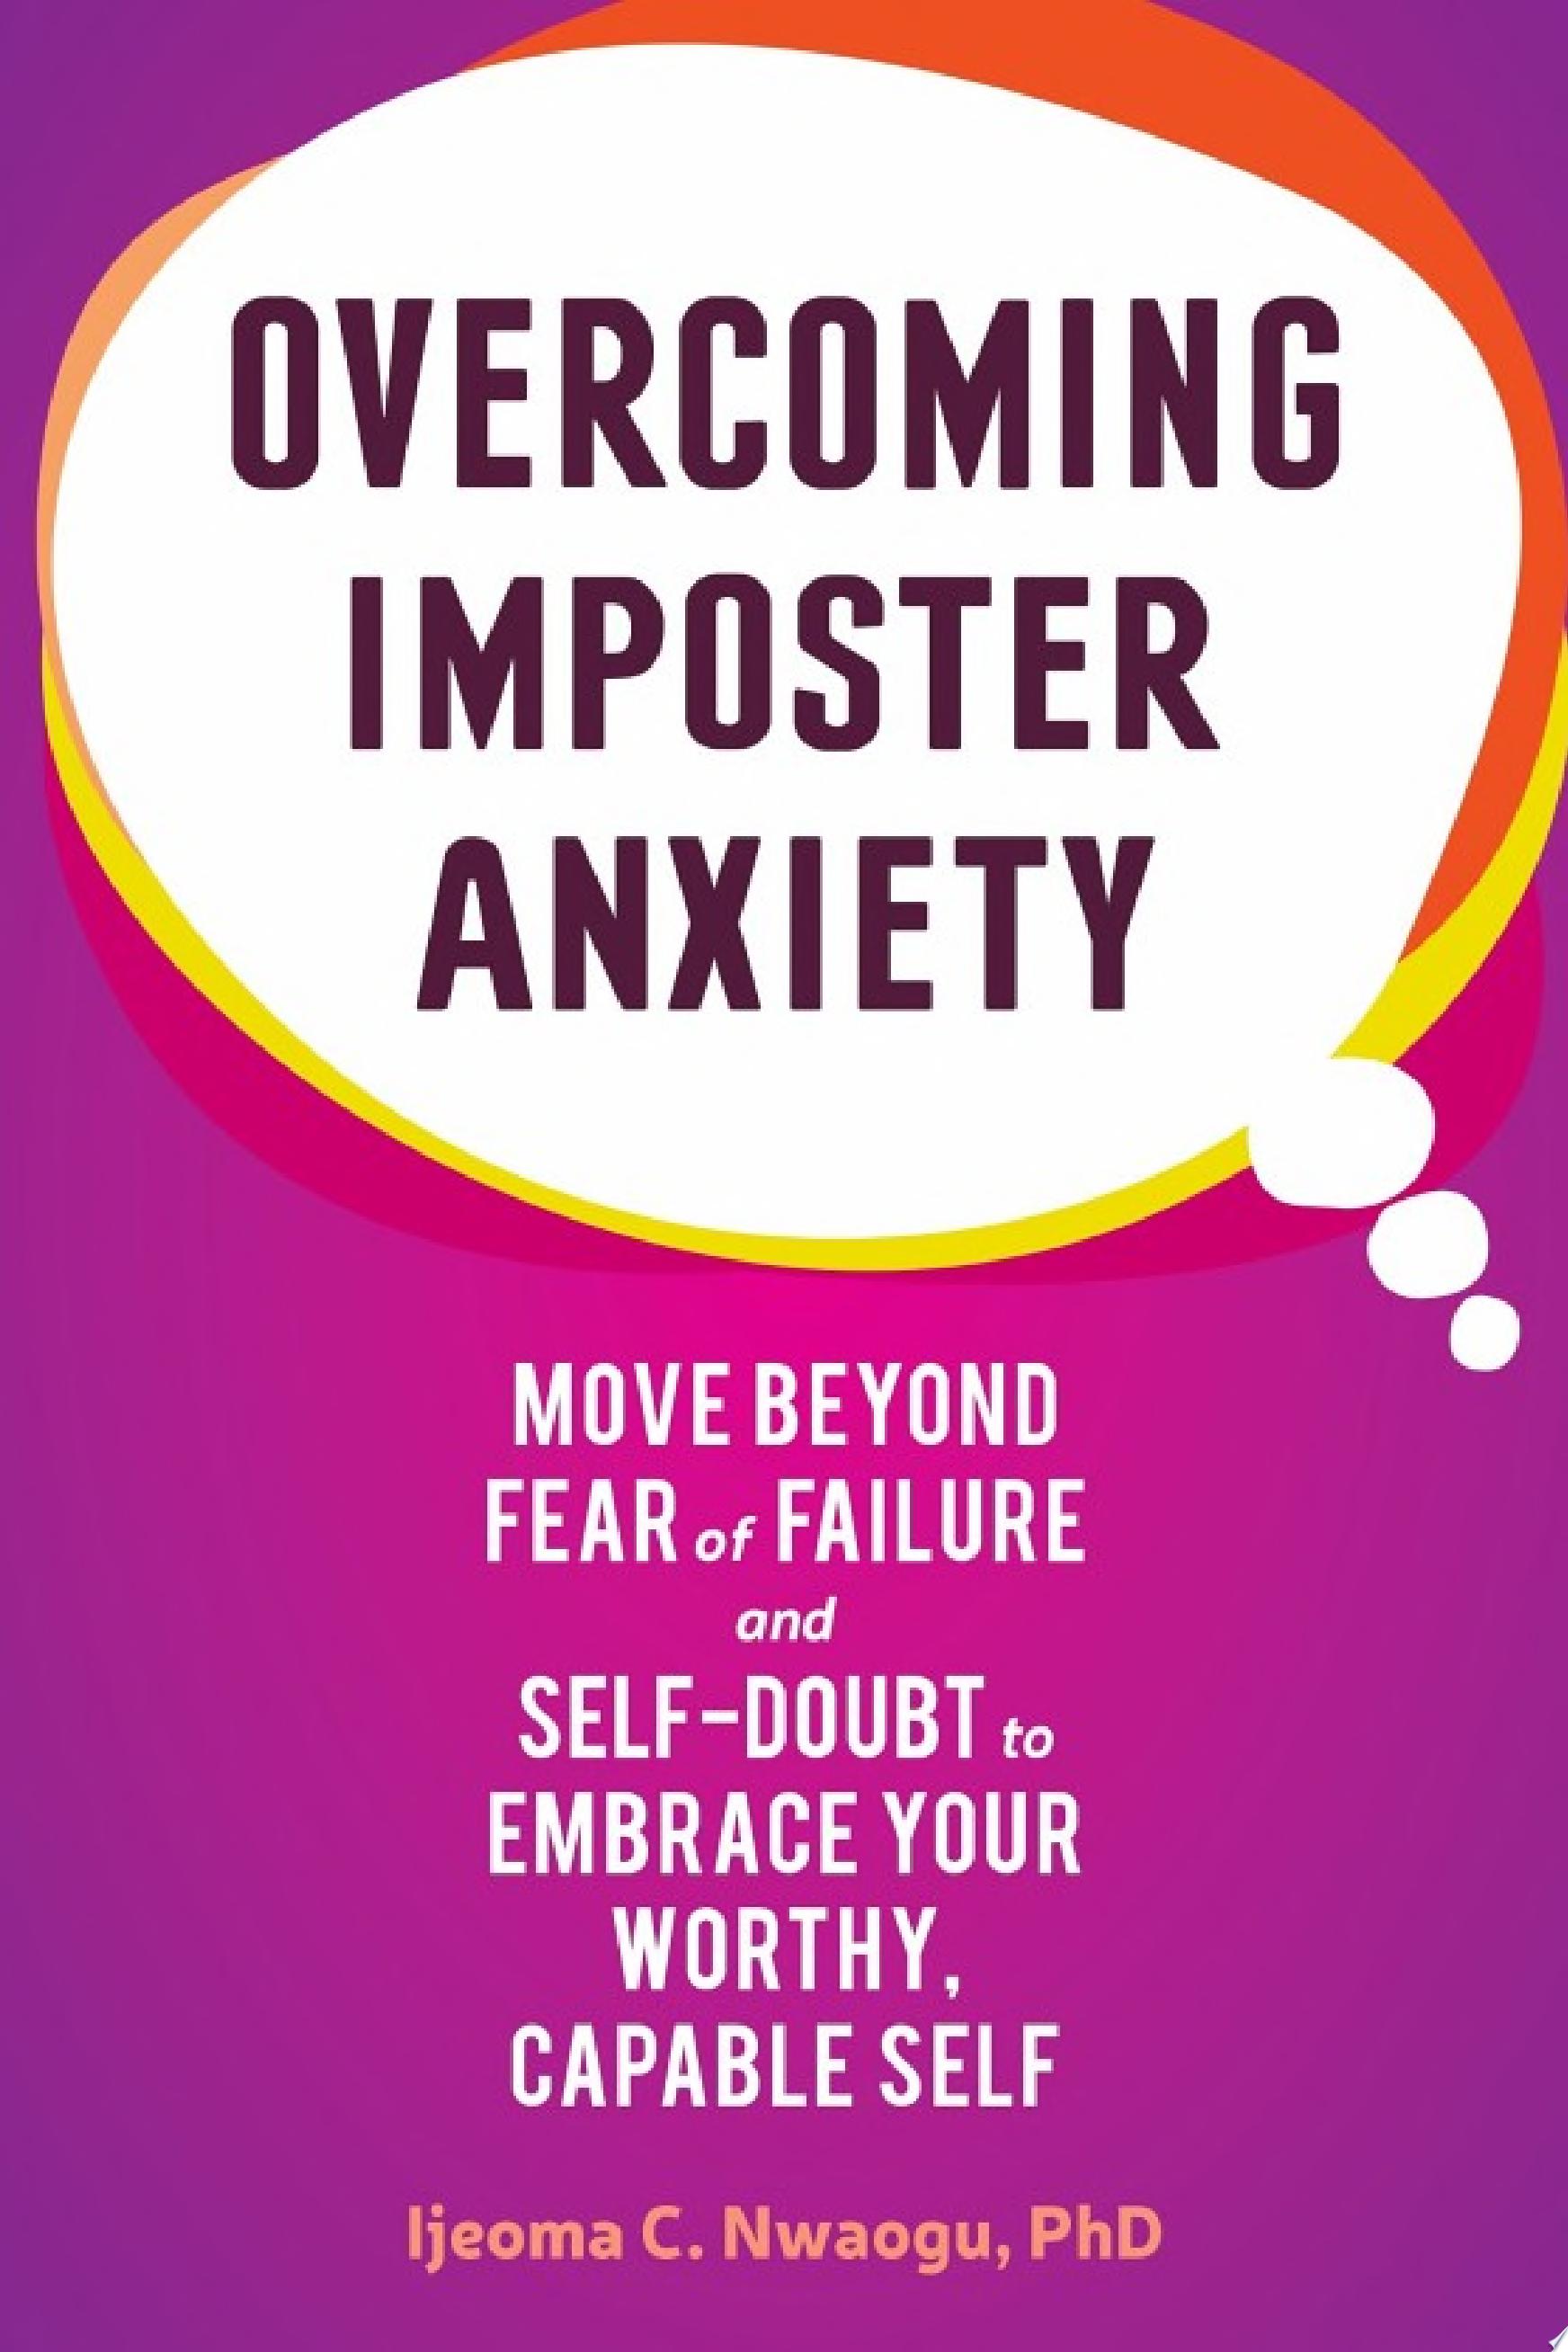 Image for "Overcoming Imposter Anxiety"